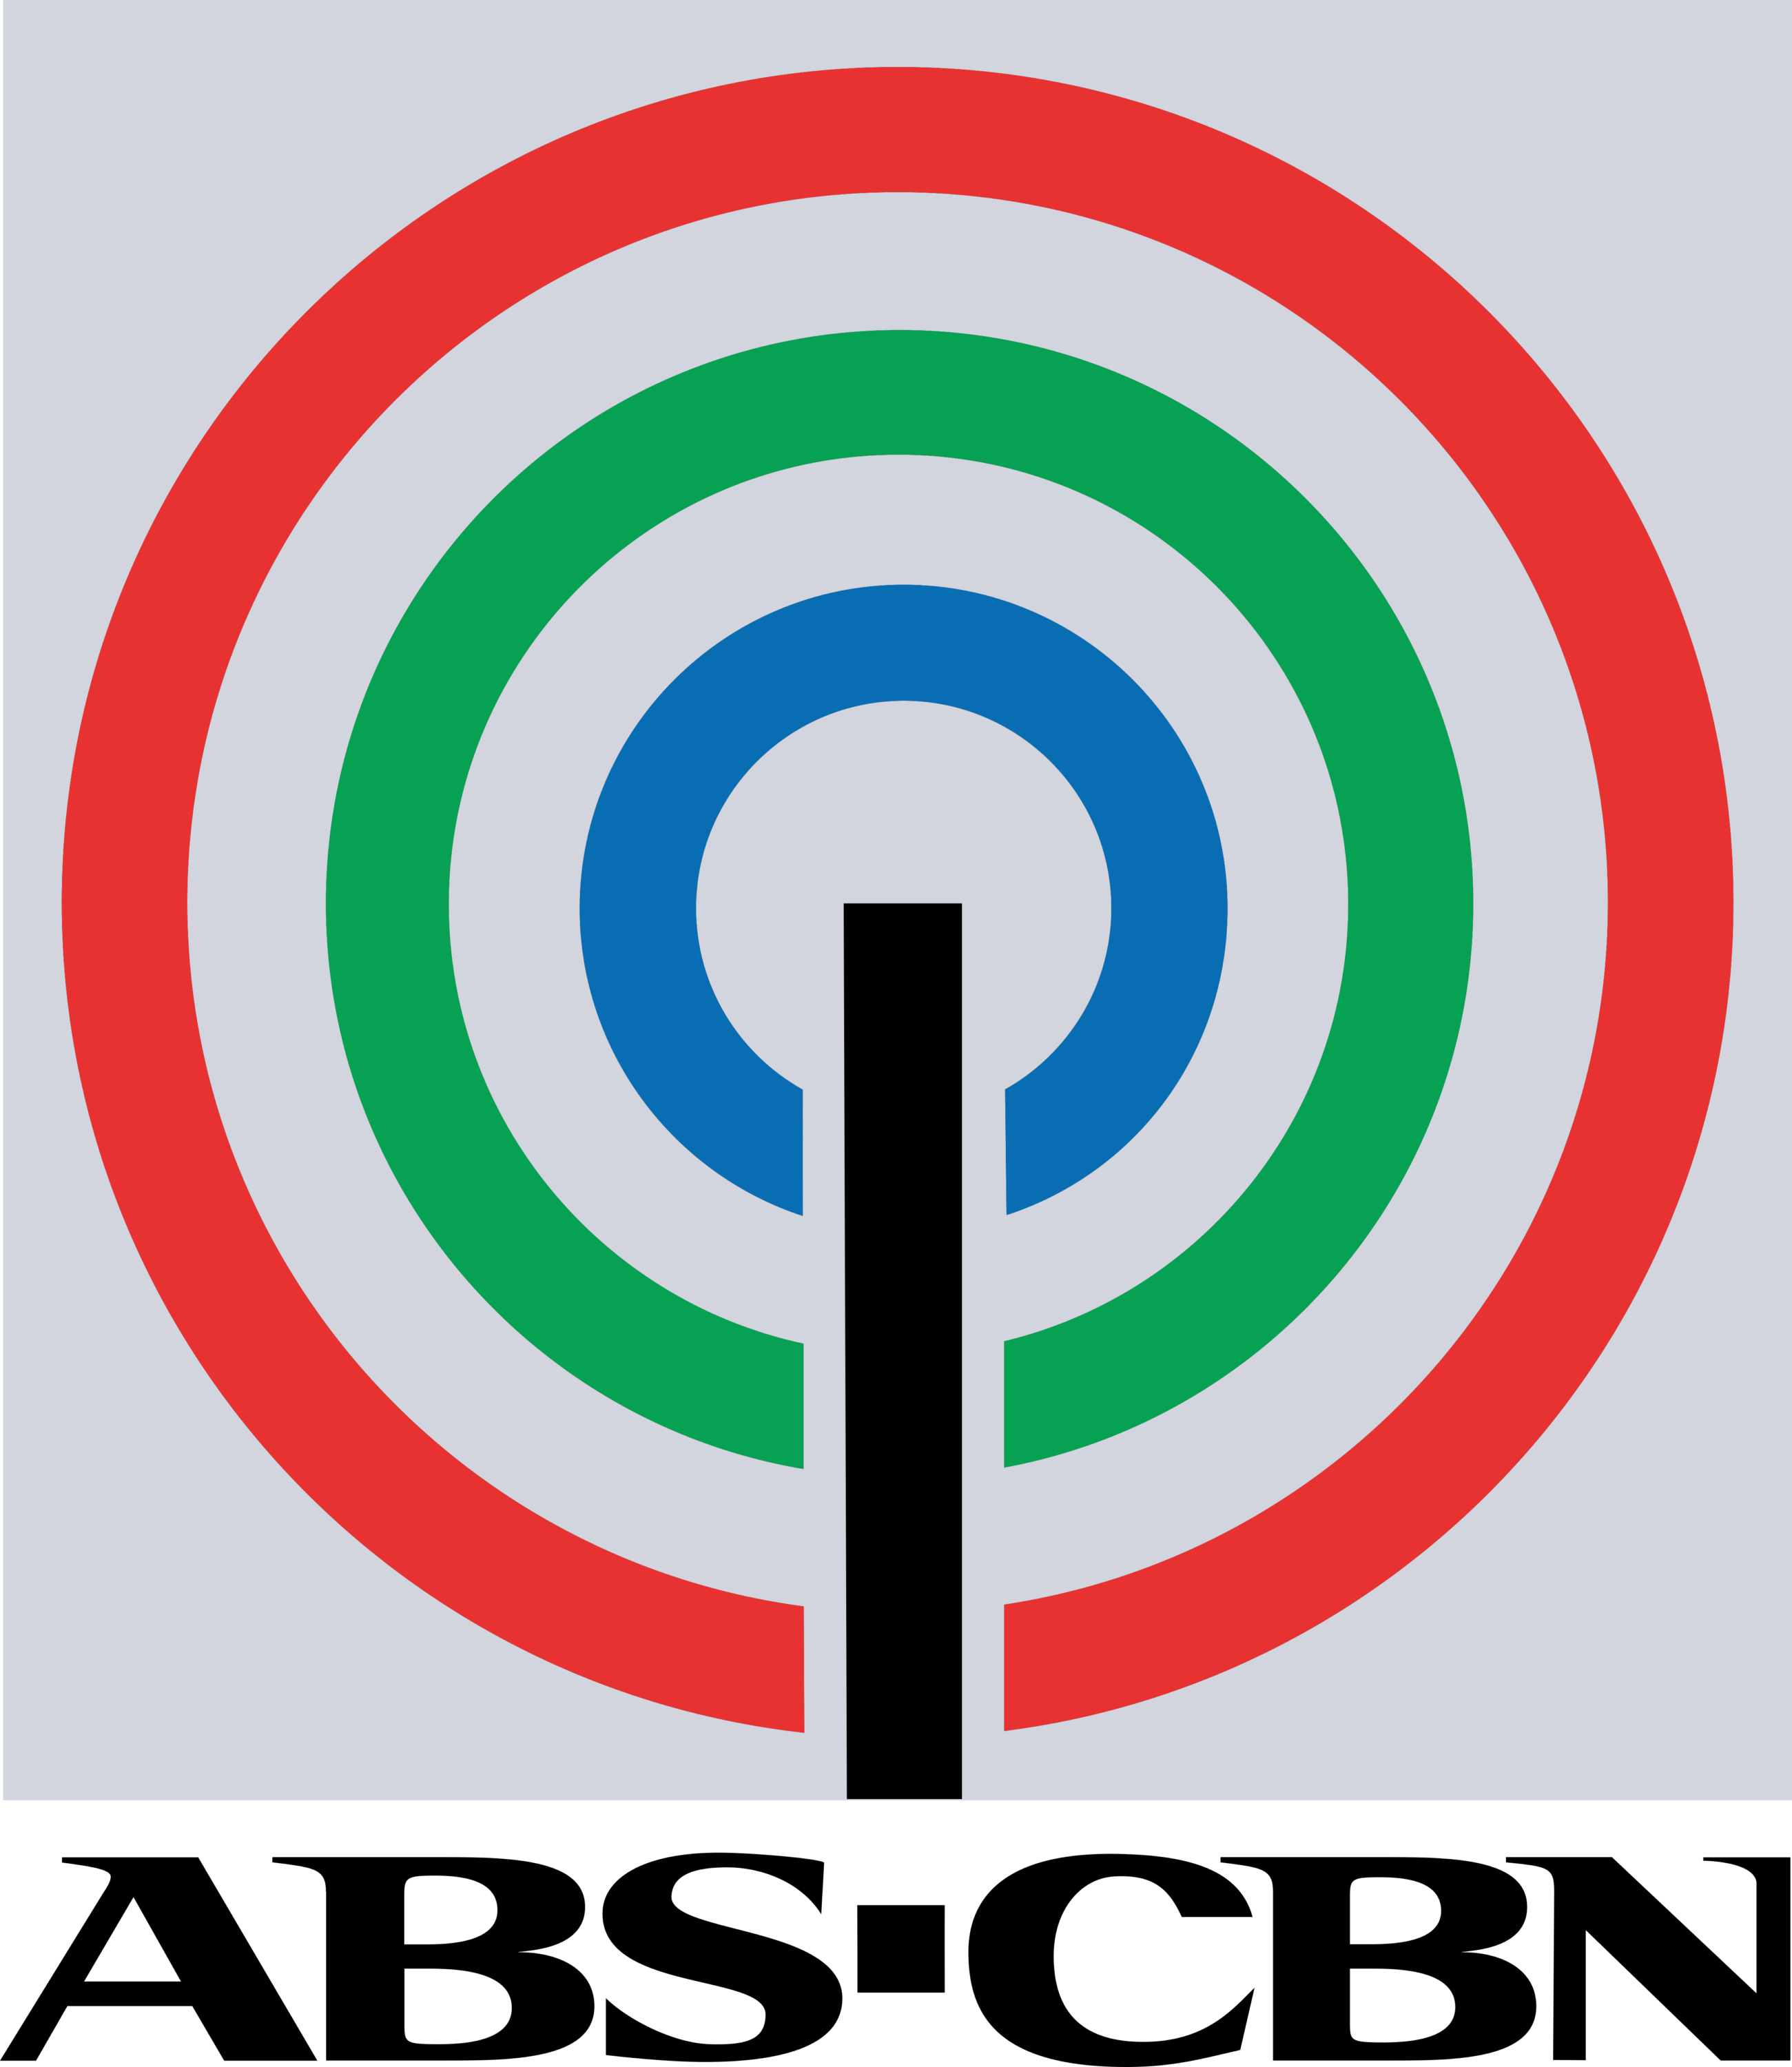 Alto Broadcasting System Chronicle Broadcasting Network (ABS CBN) Logo 2000